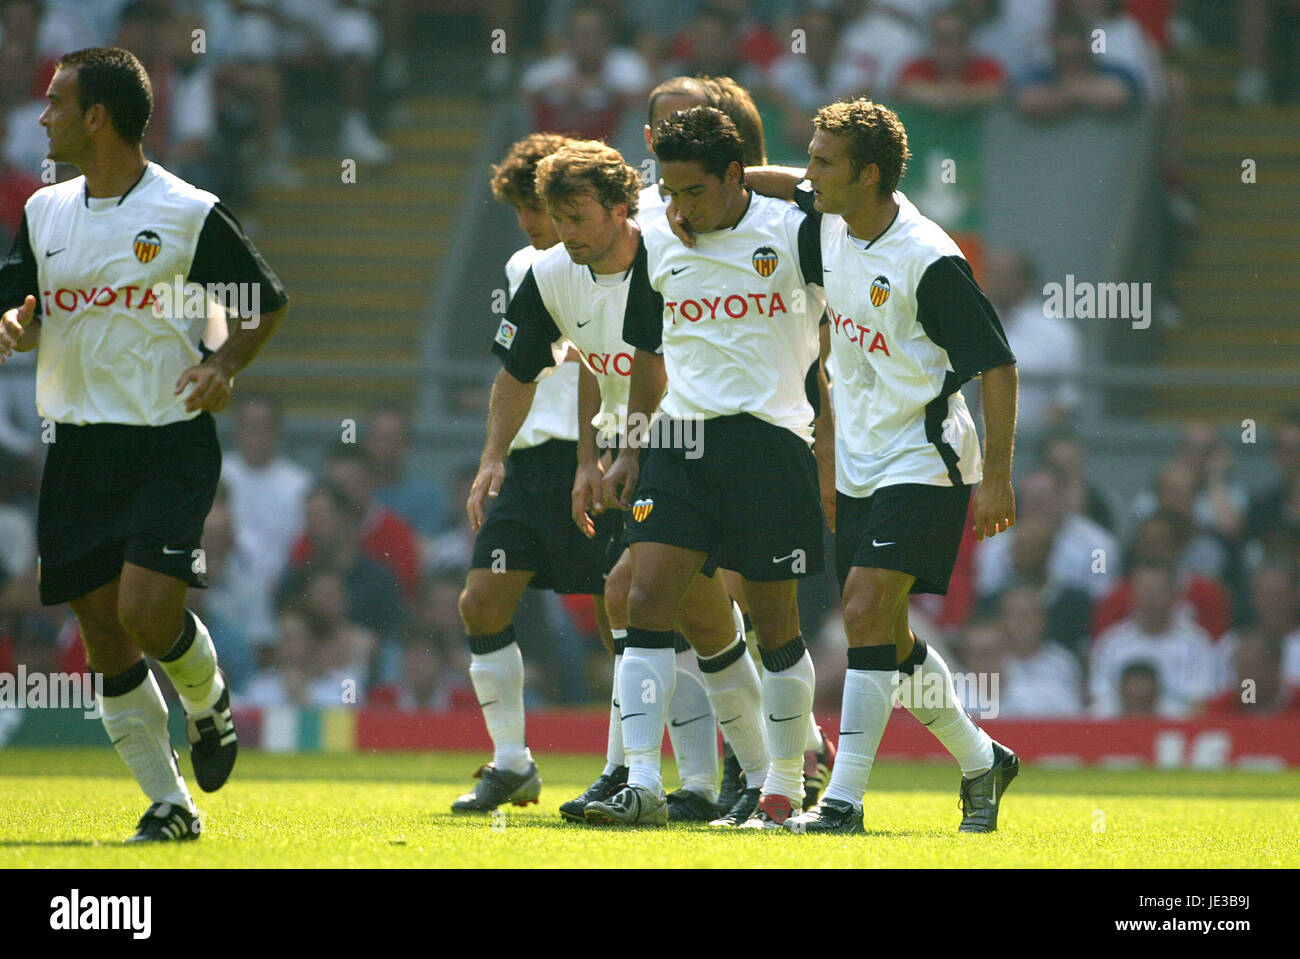 VICENTE RODRIGUEZ & TEAM MATES LIVERPOOL V VALENCIA Anfield Road LIVERPOOL ENGLAND 9. August 2003 Stockfoto